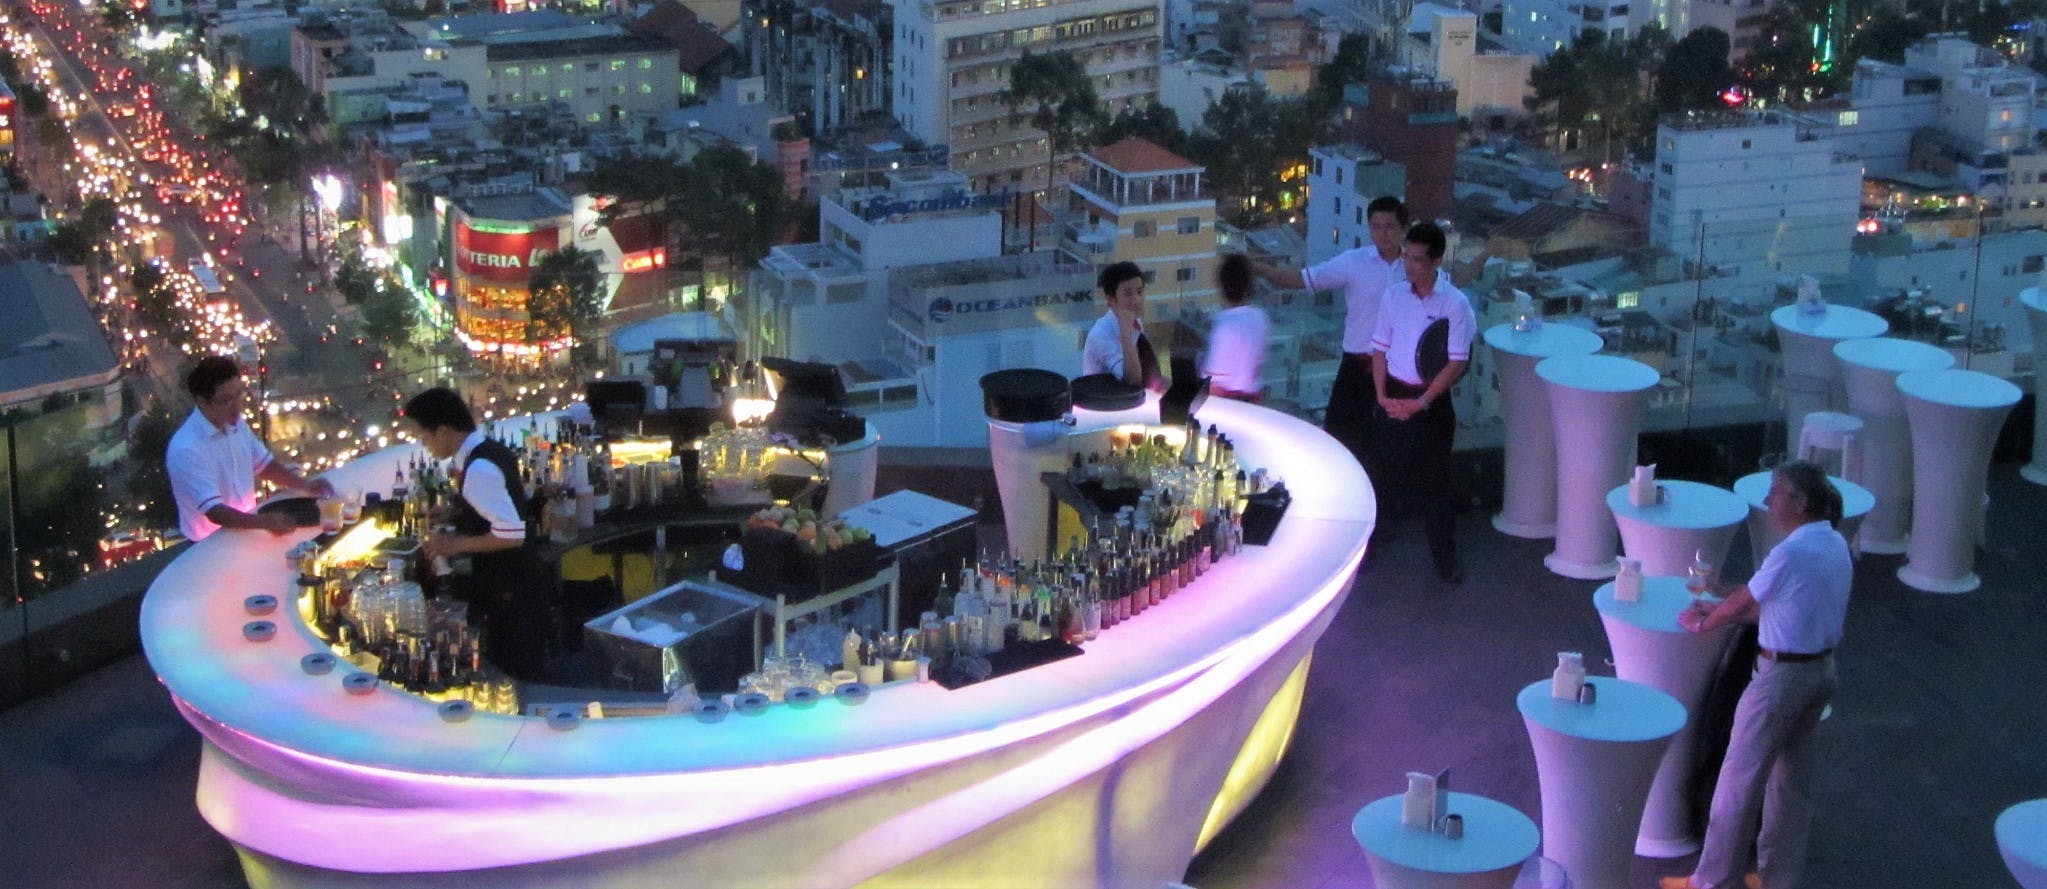 Rooftop cocktails & sky bars in Saigon (Ho Chi Minh City)